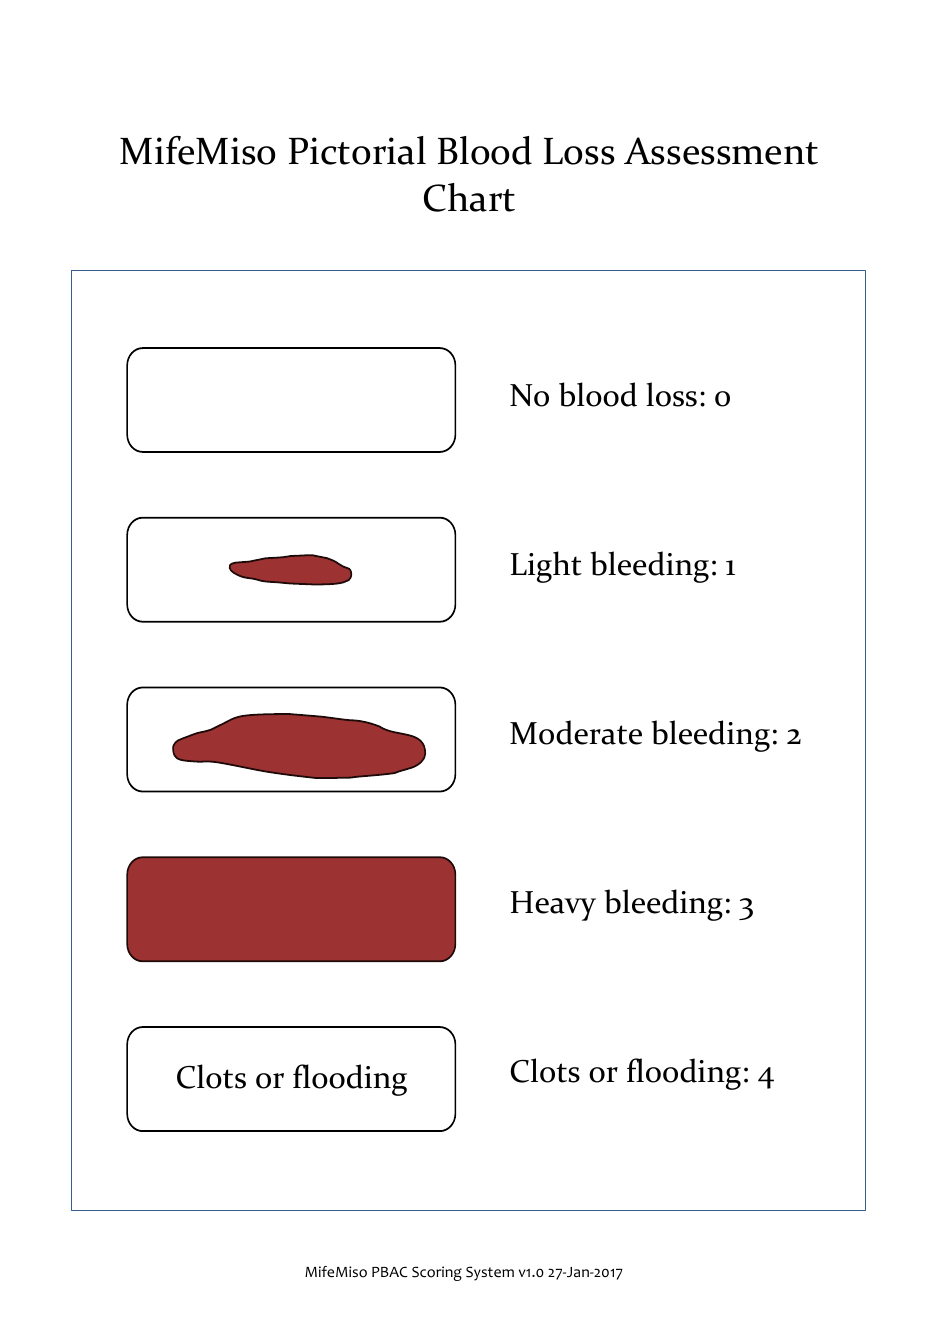 Pictorial Blood Loss Assessment Chart, Page 1